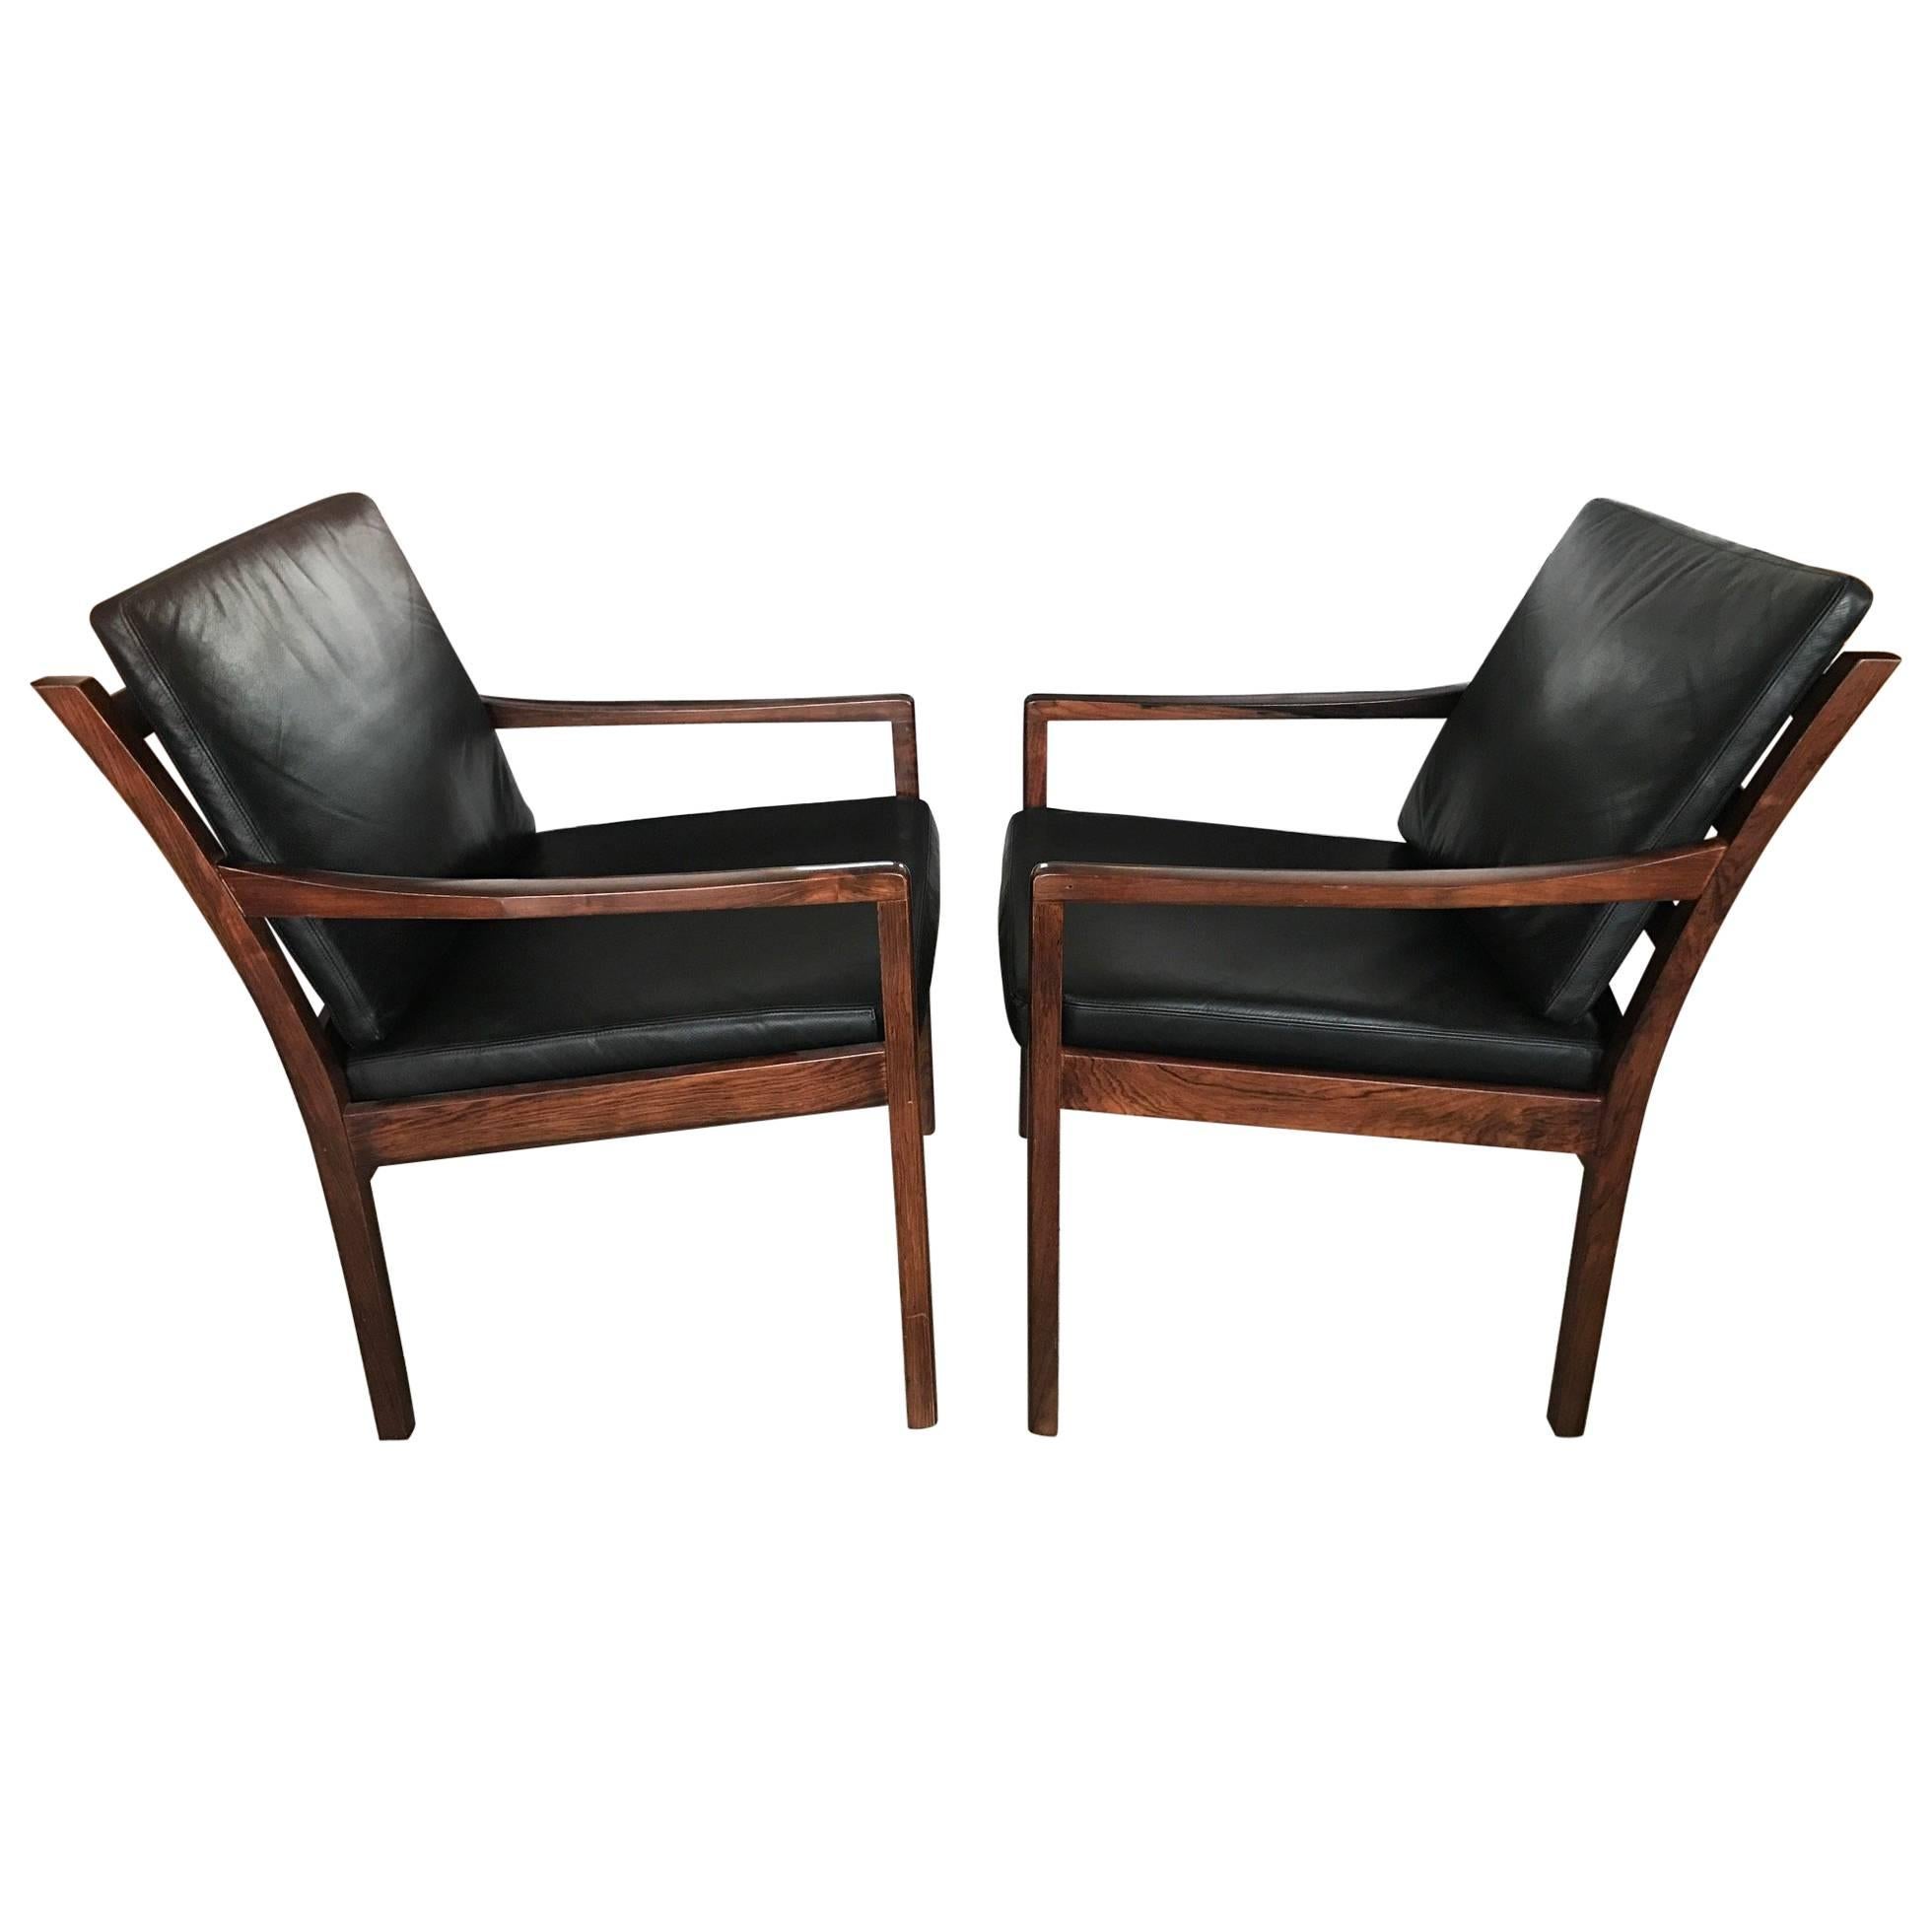 Pair of Fredrik Kayser Rosewood Chairs For Sale